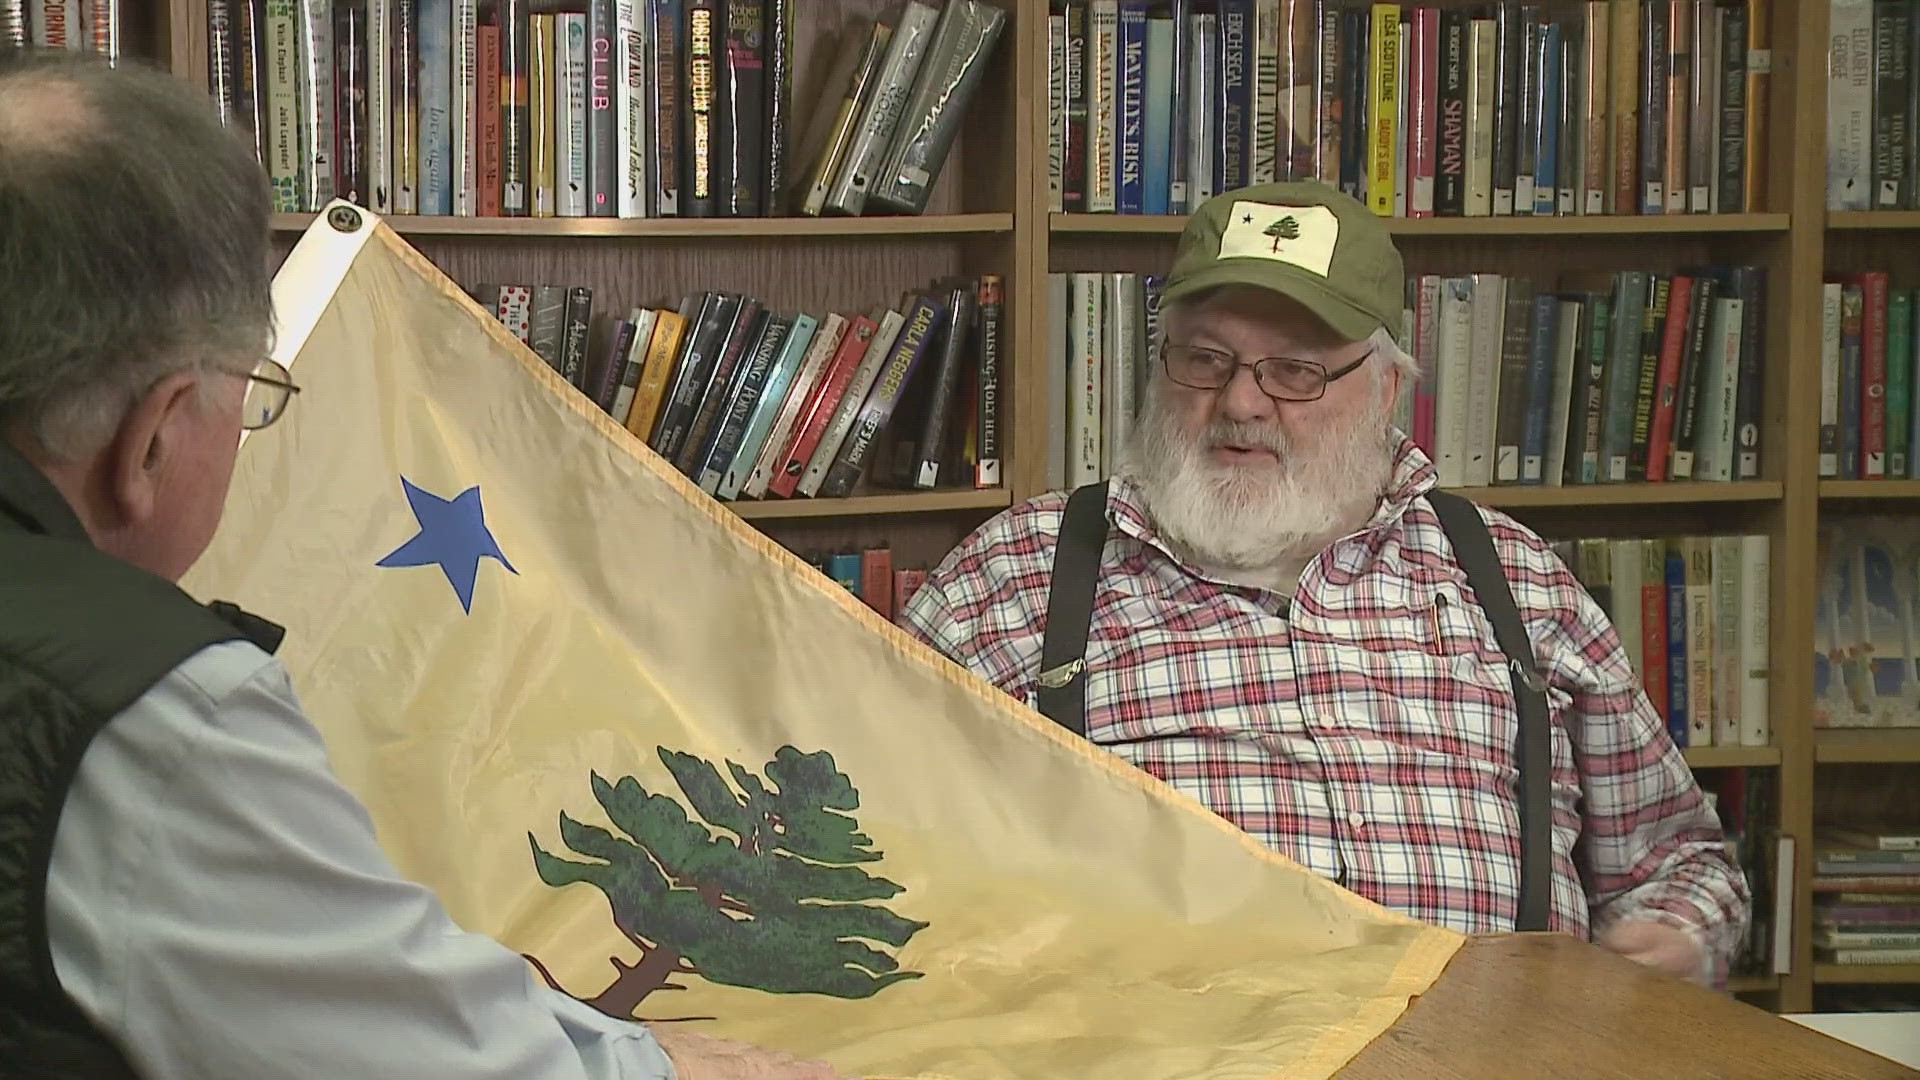 Maine voters could soon determine the future of the state flag, possibly trading in the state coat of arms for a pine tree and star.